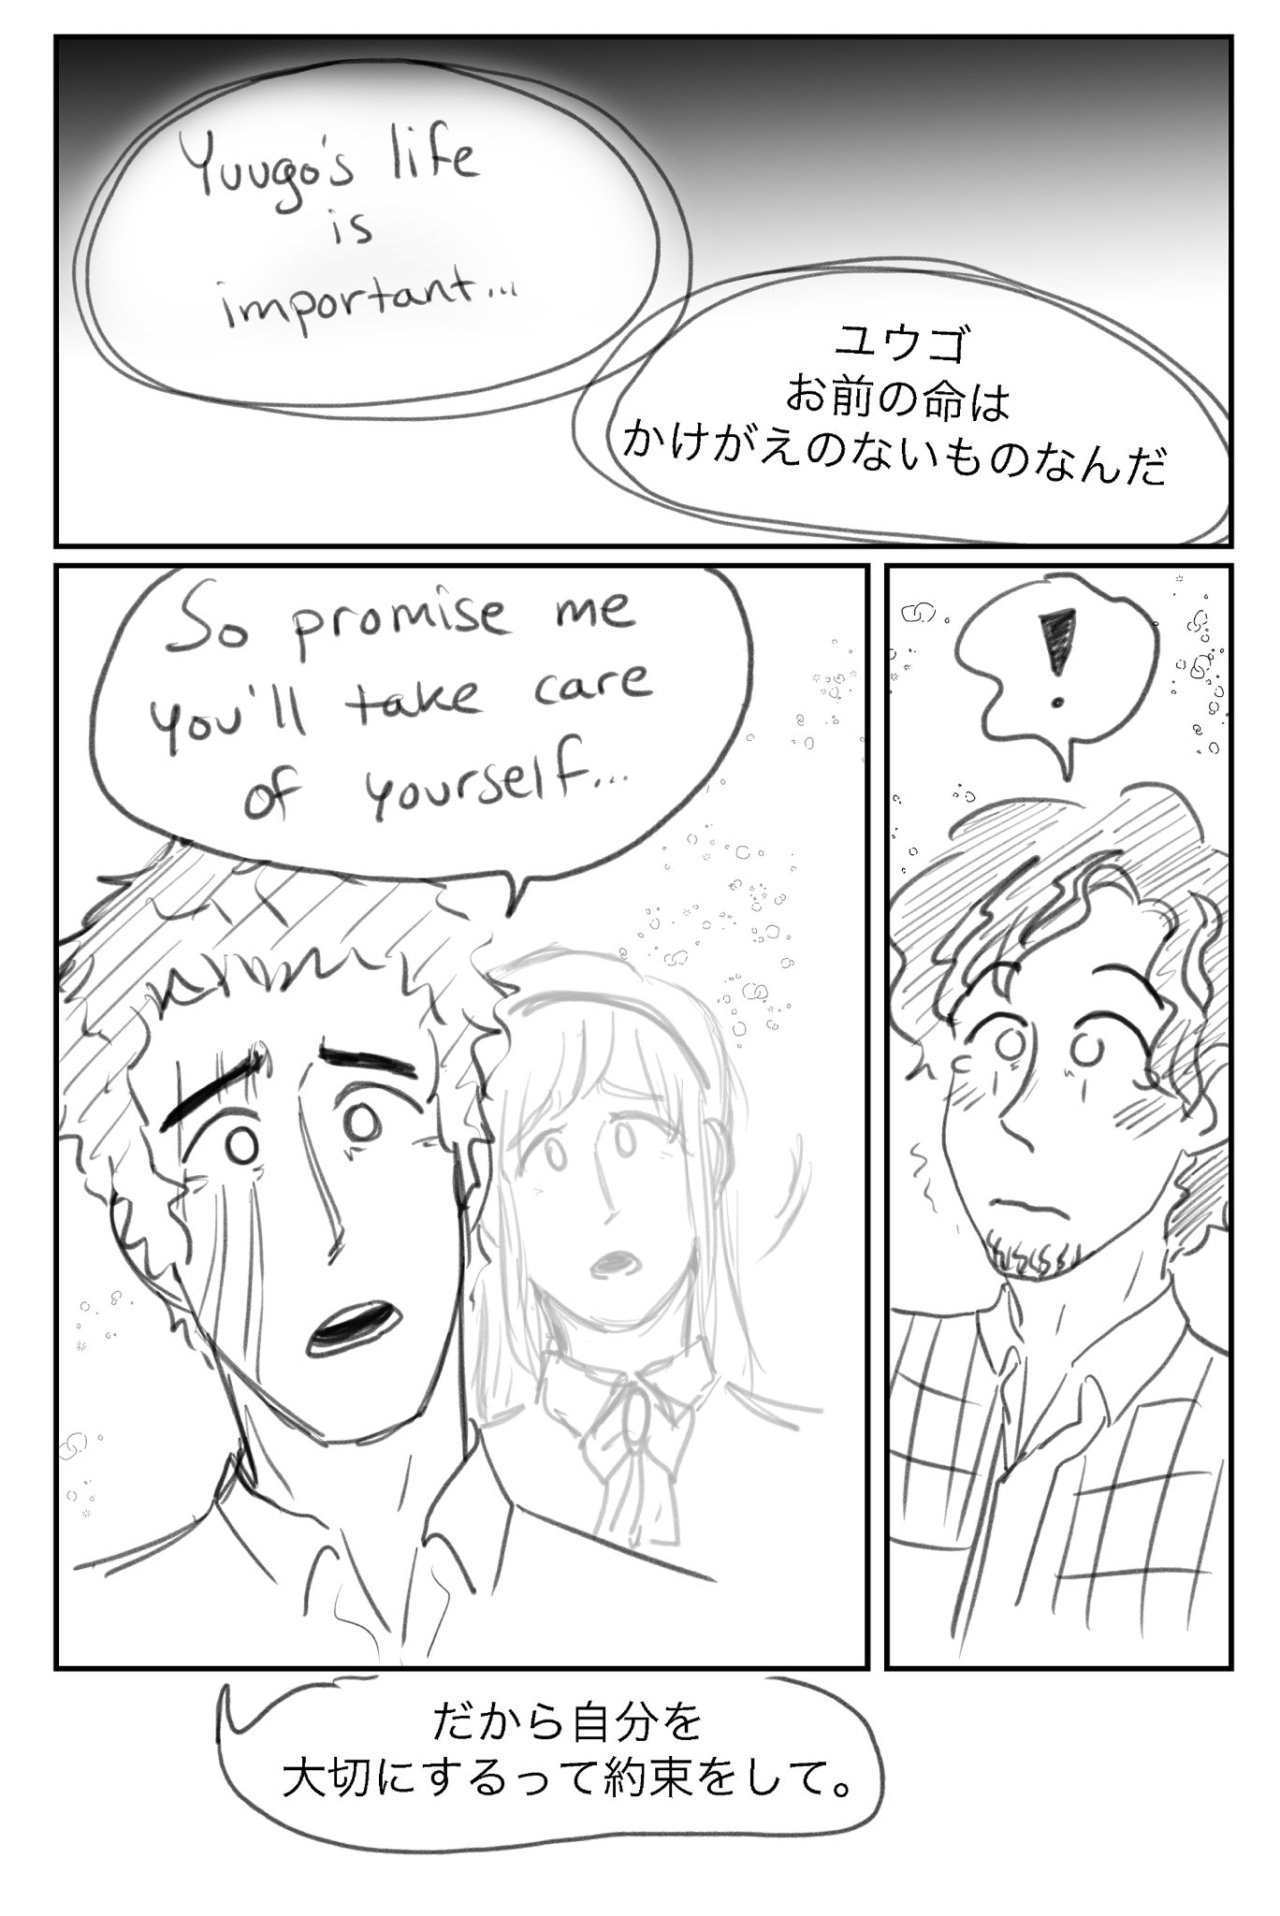 a small comic from a yuugo and lucas fest on twitter! thankful to have it translated to Japanese by a mutual! #tpn yuugo#tpn lucas #the promised neverland #tpn dinah#(a little)